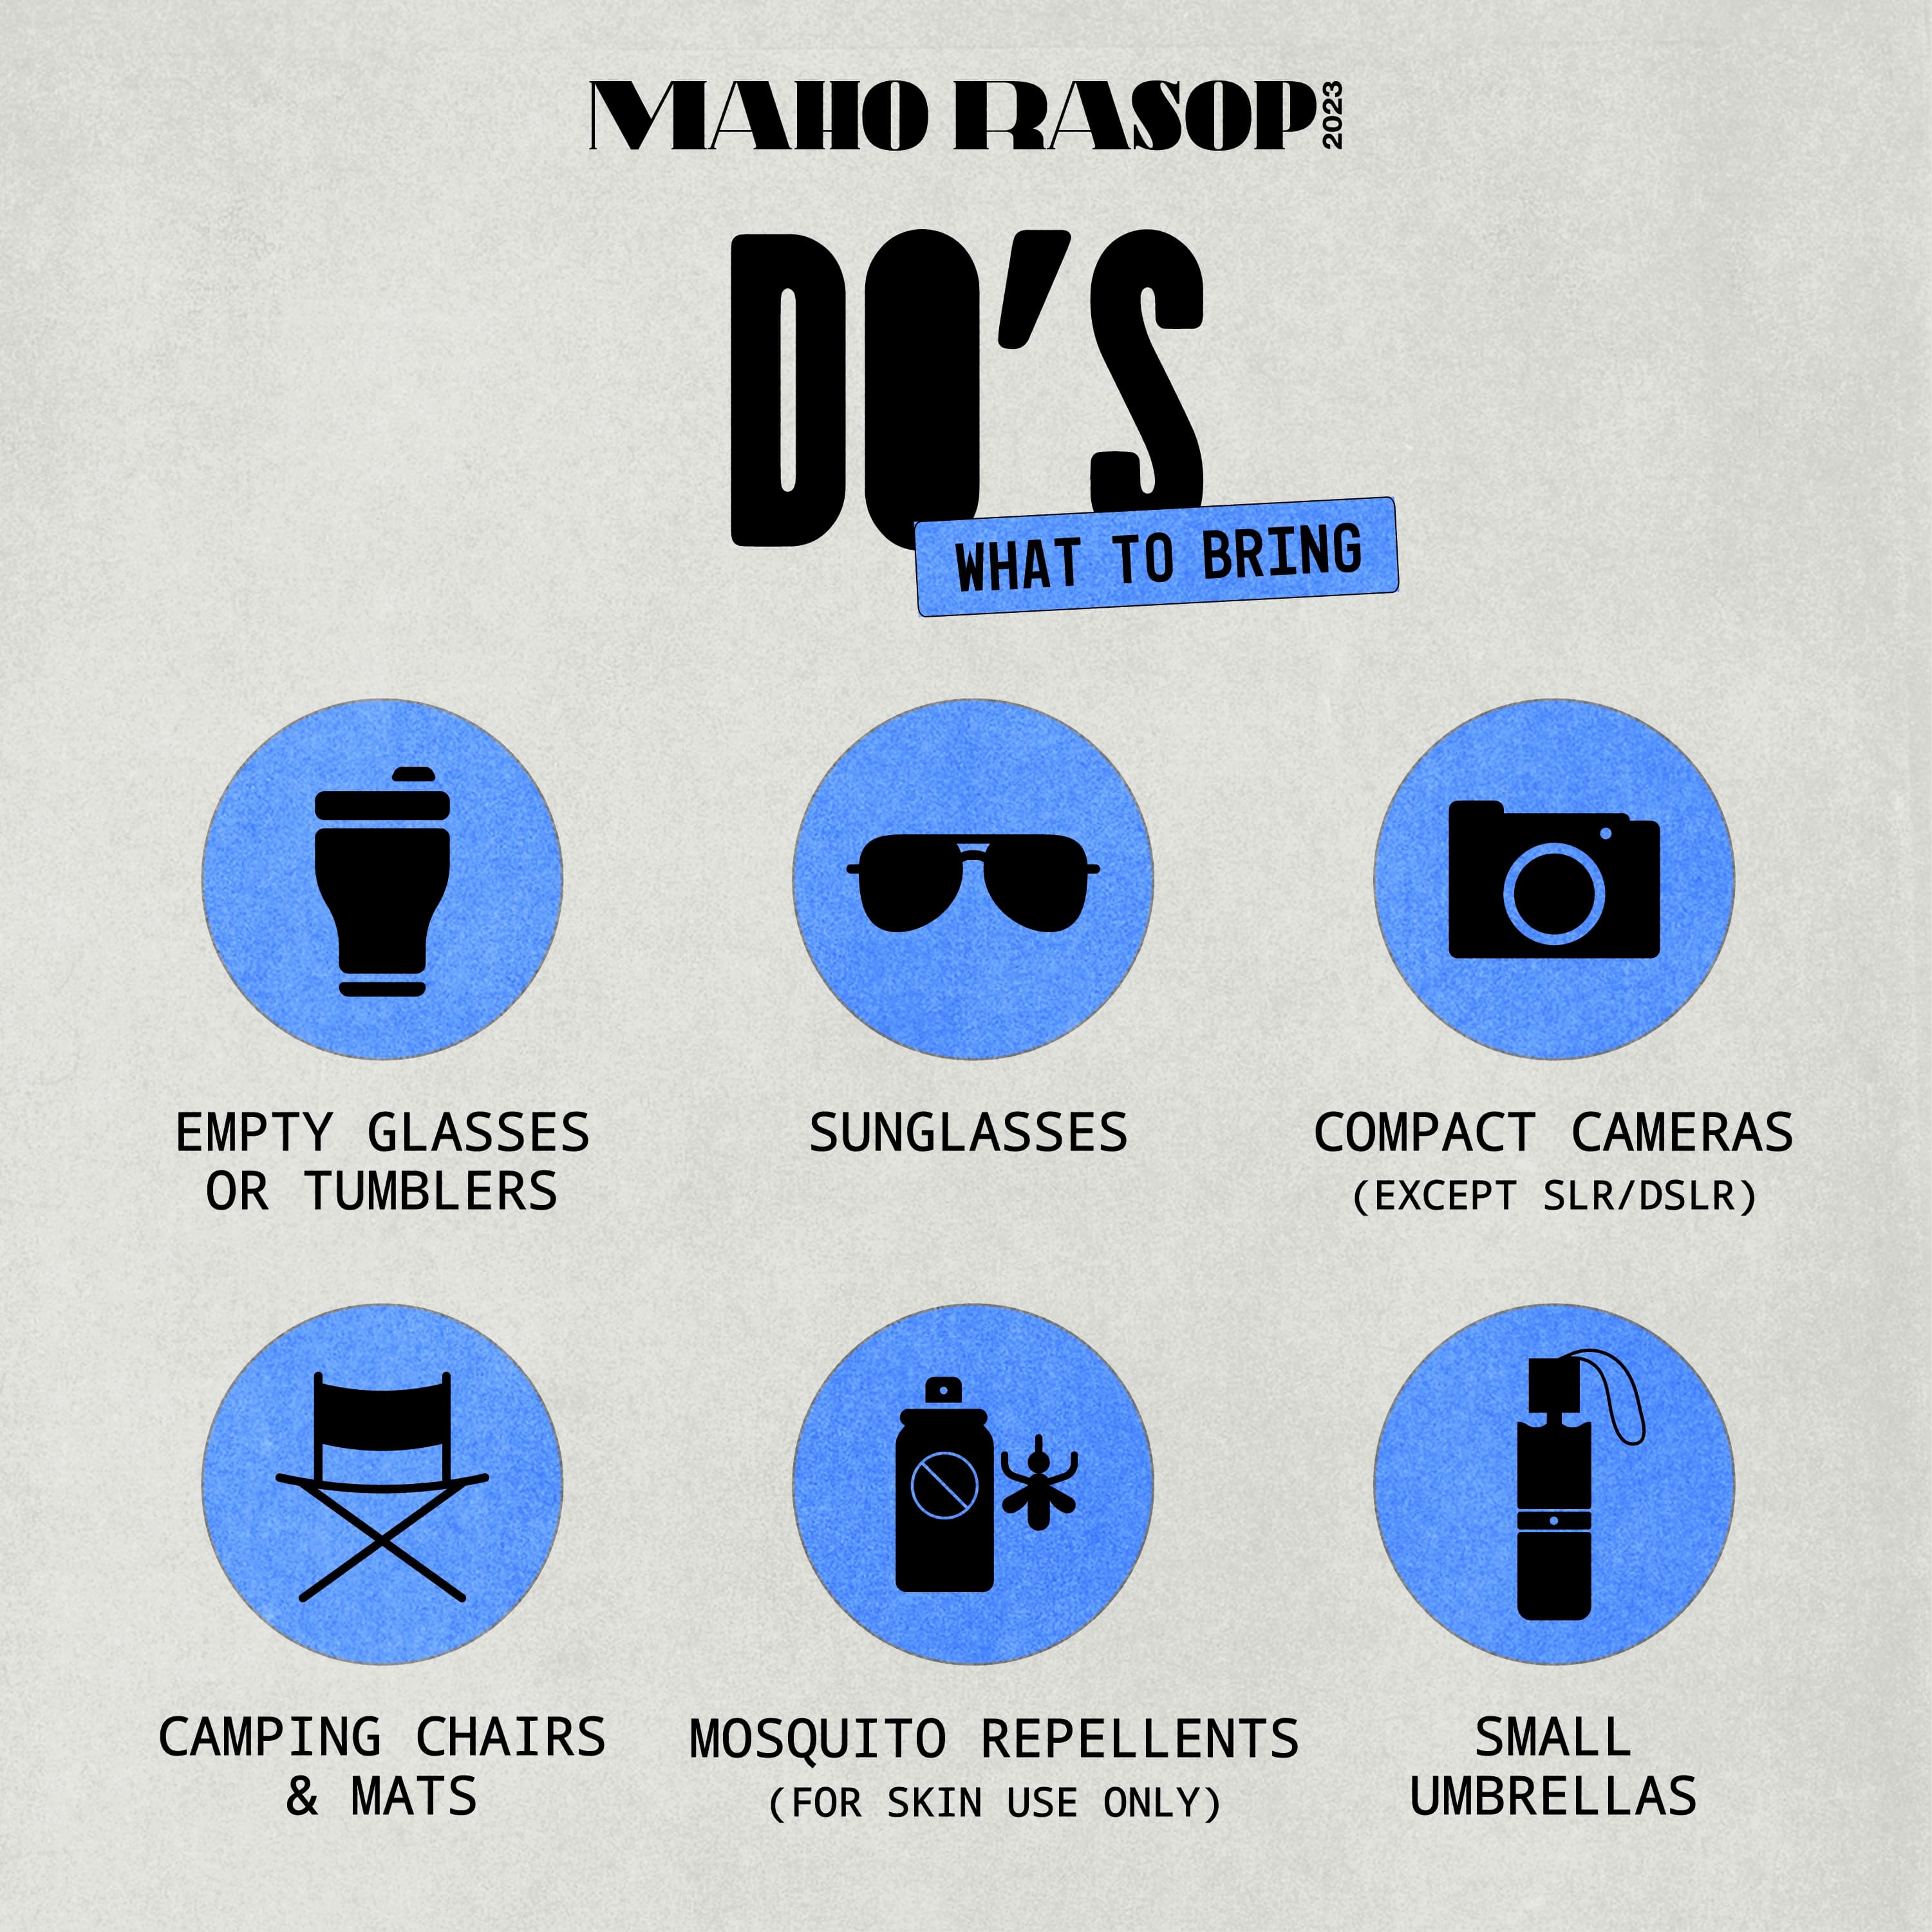 DO AND DON'TS